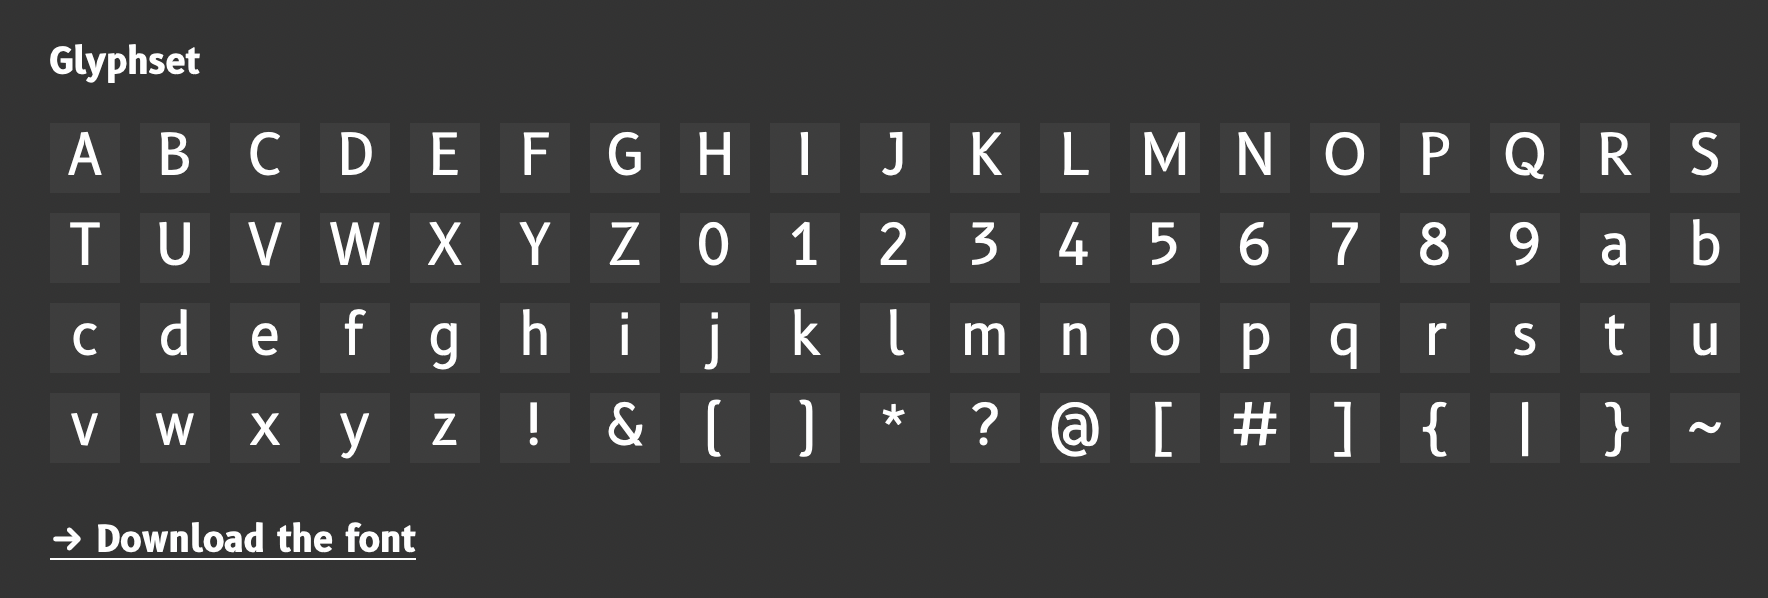 All the letters of the B612 font.